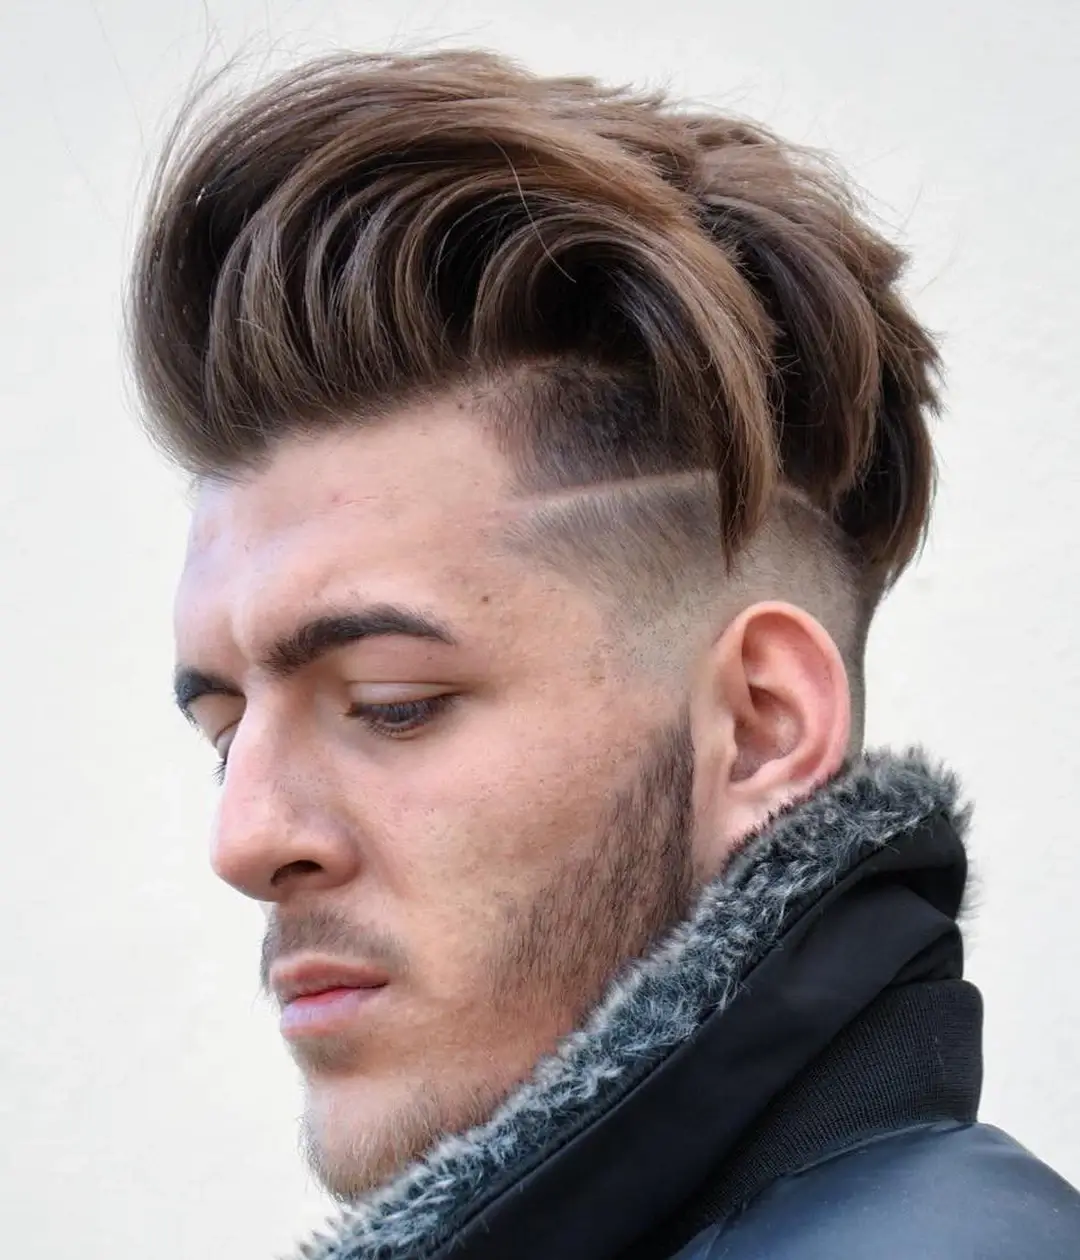 Men's Side Swept Disconnected Undercut from Fifth Ave Barber Shop in Midtown NYC